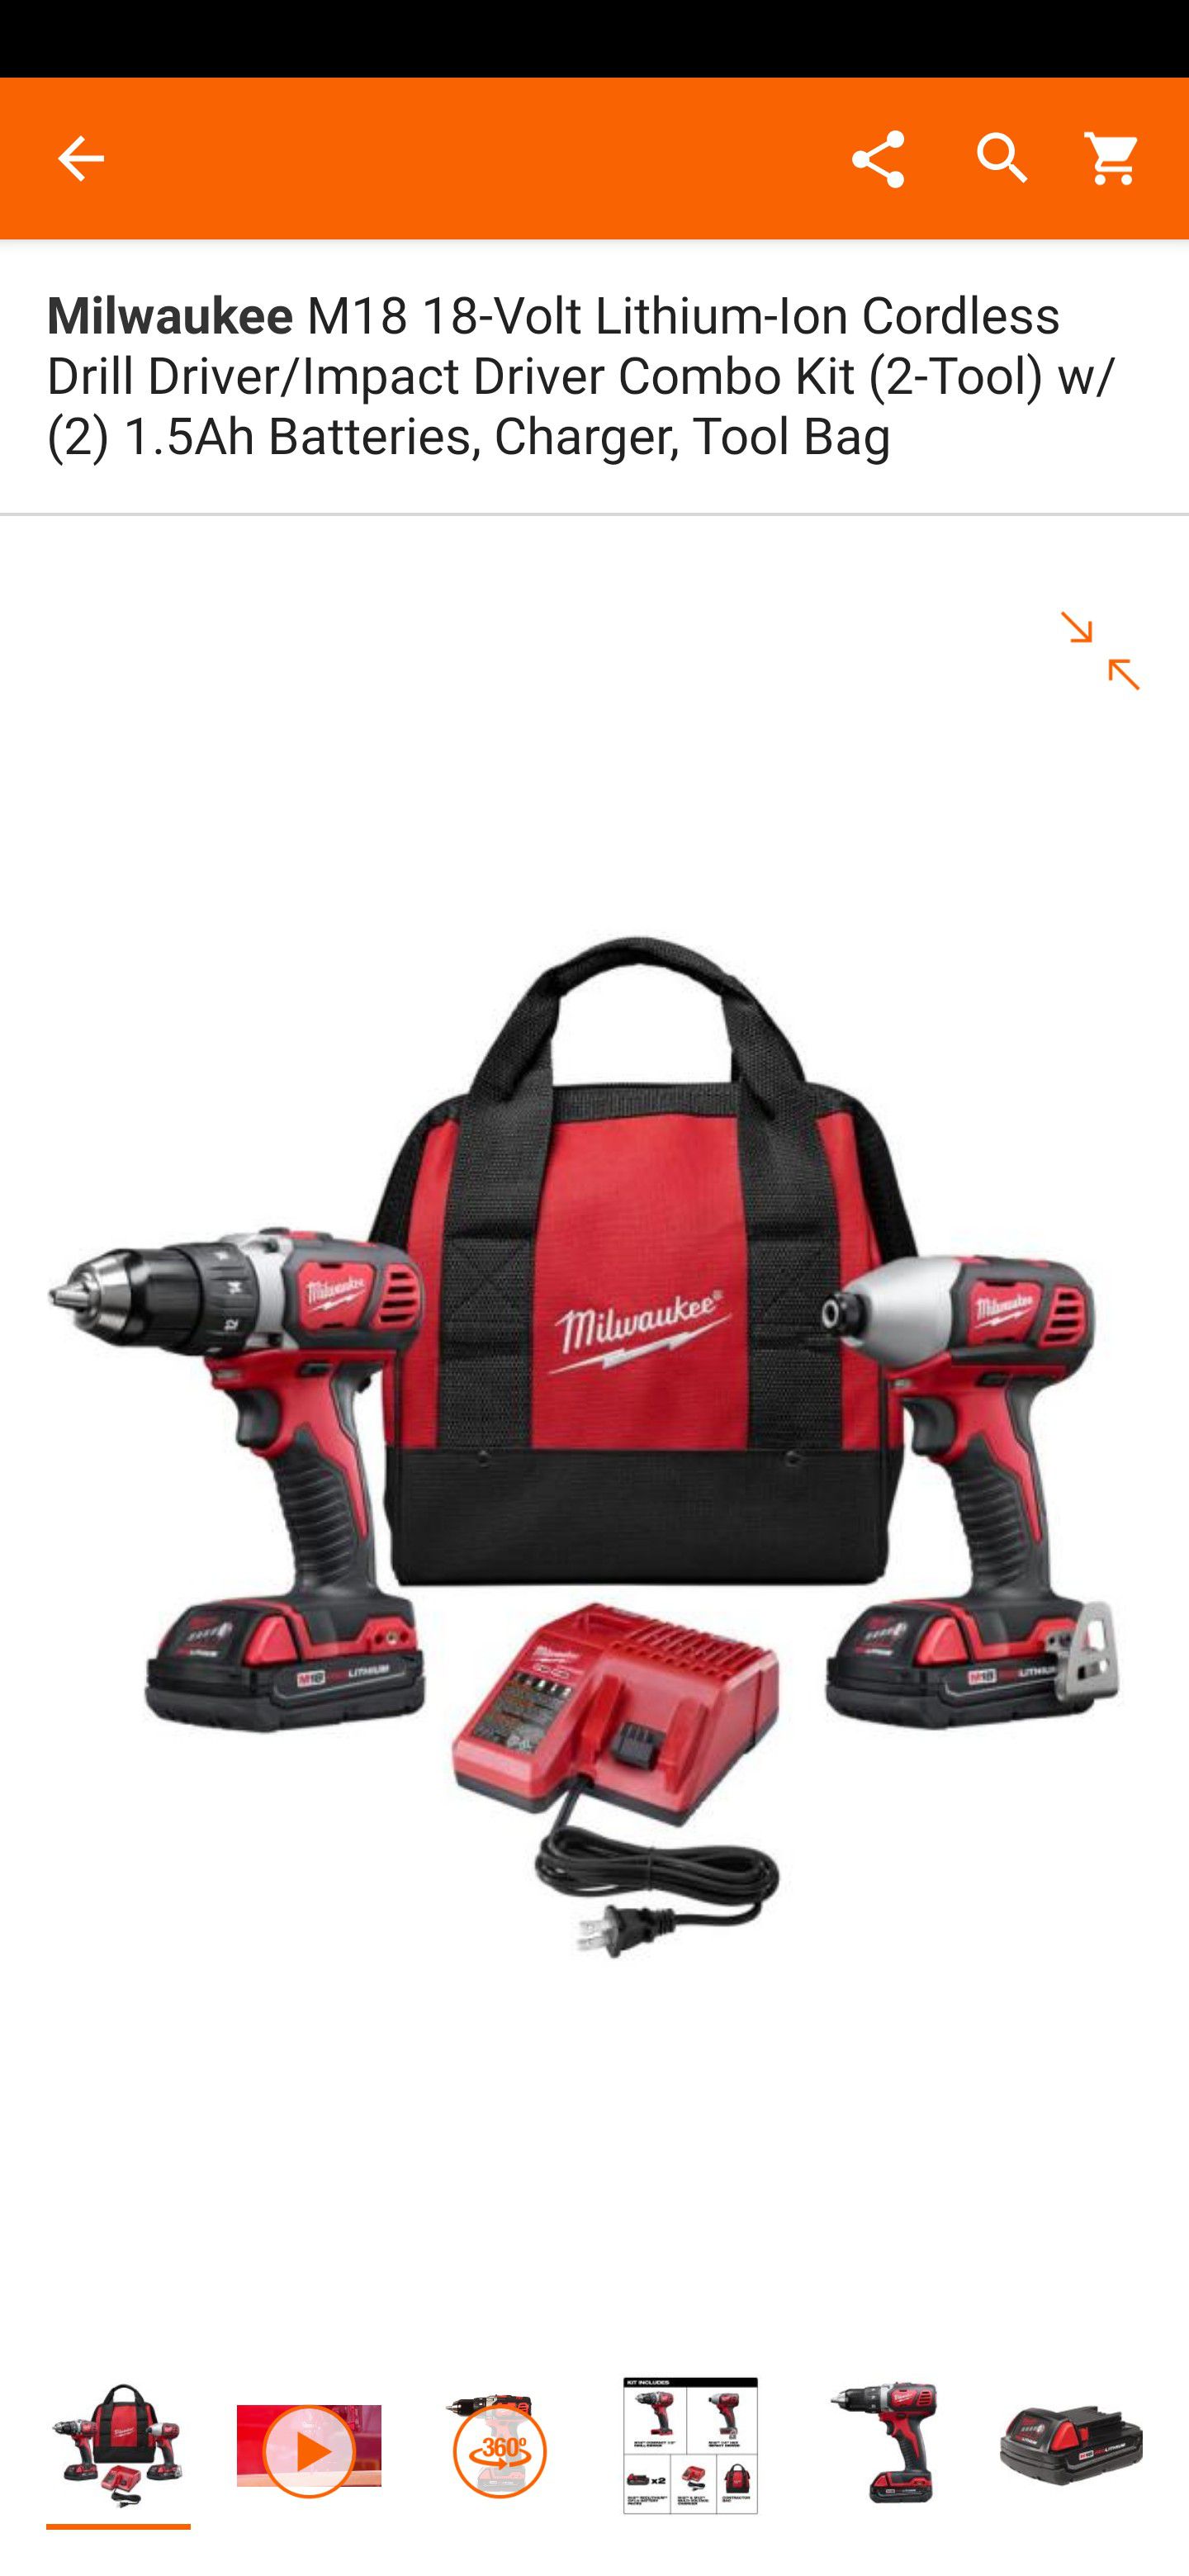 Milwaukee M18 18-Volt Lithium-Ion NEVER USED!! BRAND NEW!! Cordless Drill Driver/Impact Driver Combo Kit (2-Tool)